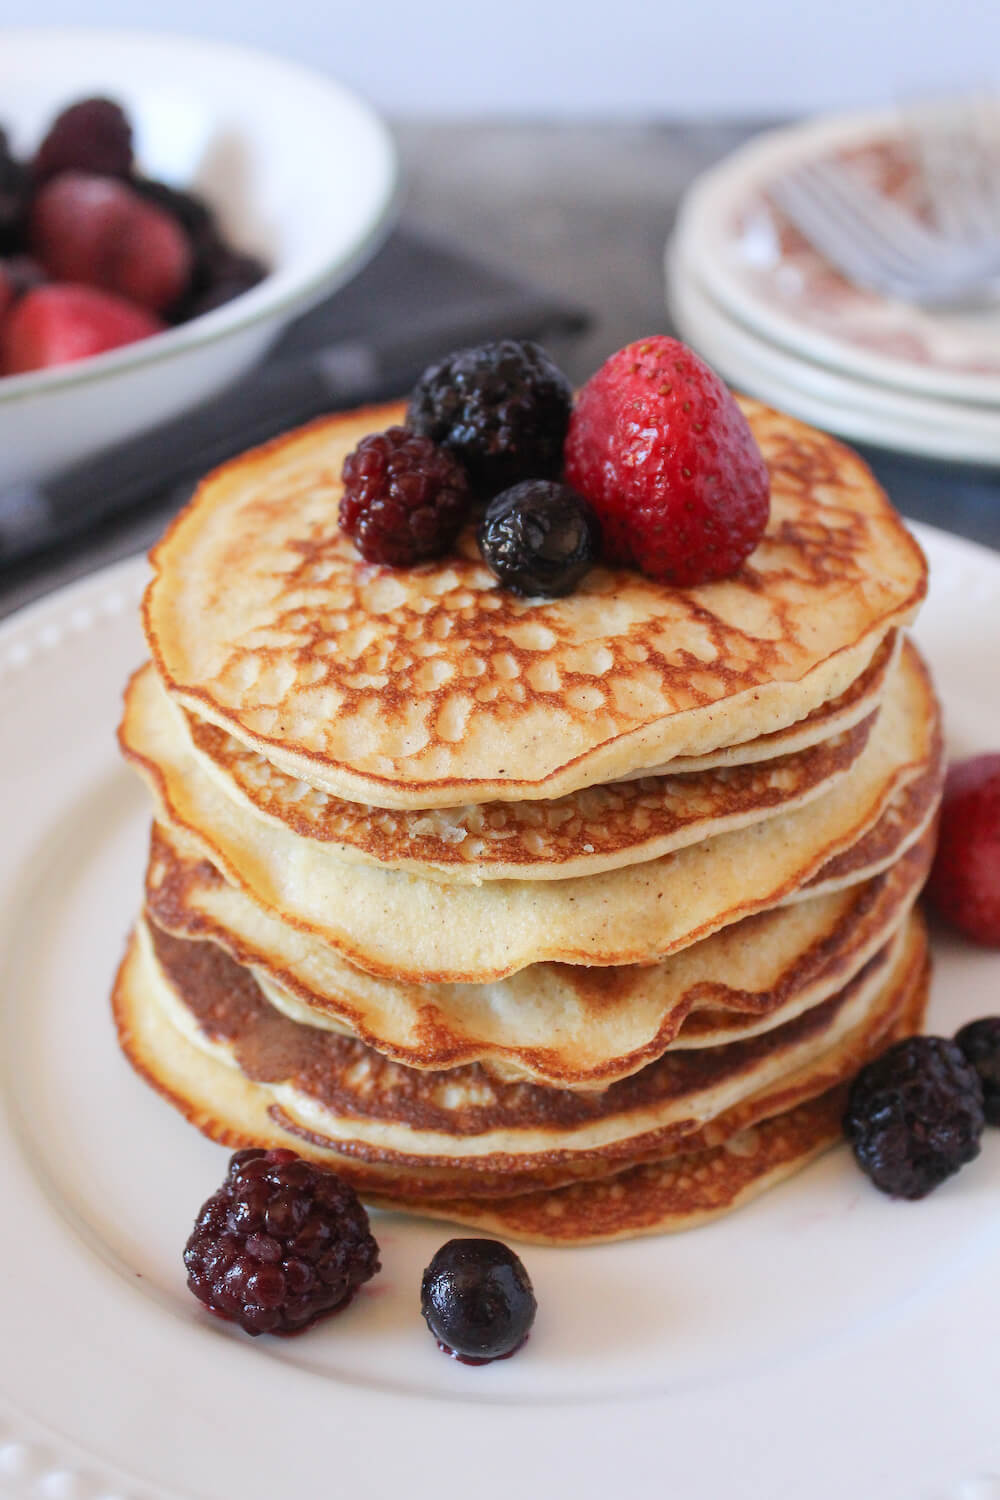 Serve these delicious pancakes with your favorite keto berries